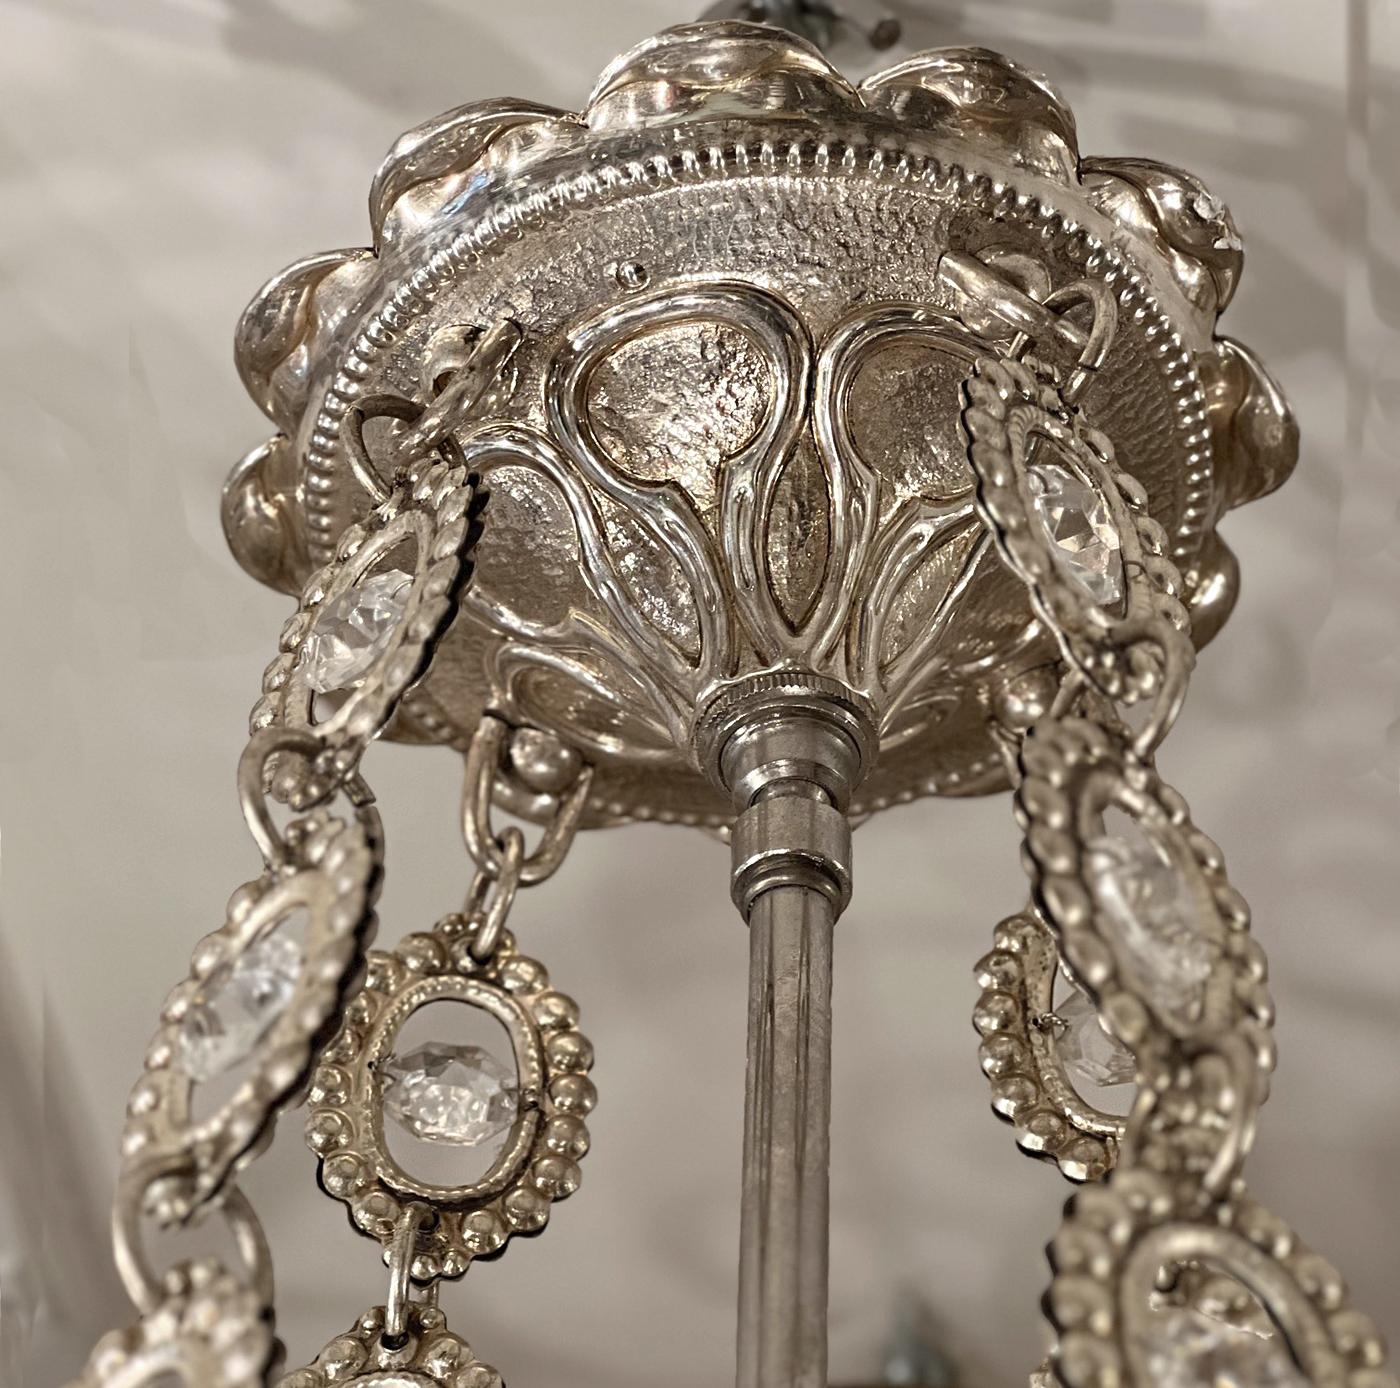 A pair of French circa 1950s silver-plated flower-shaped bronze chandeliers with crystal drops, flowers and beads on body and ten interior candelabra lights.

Measurements:
Diameter: 40